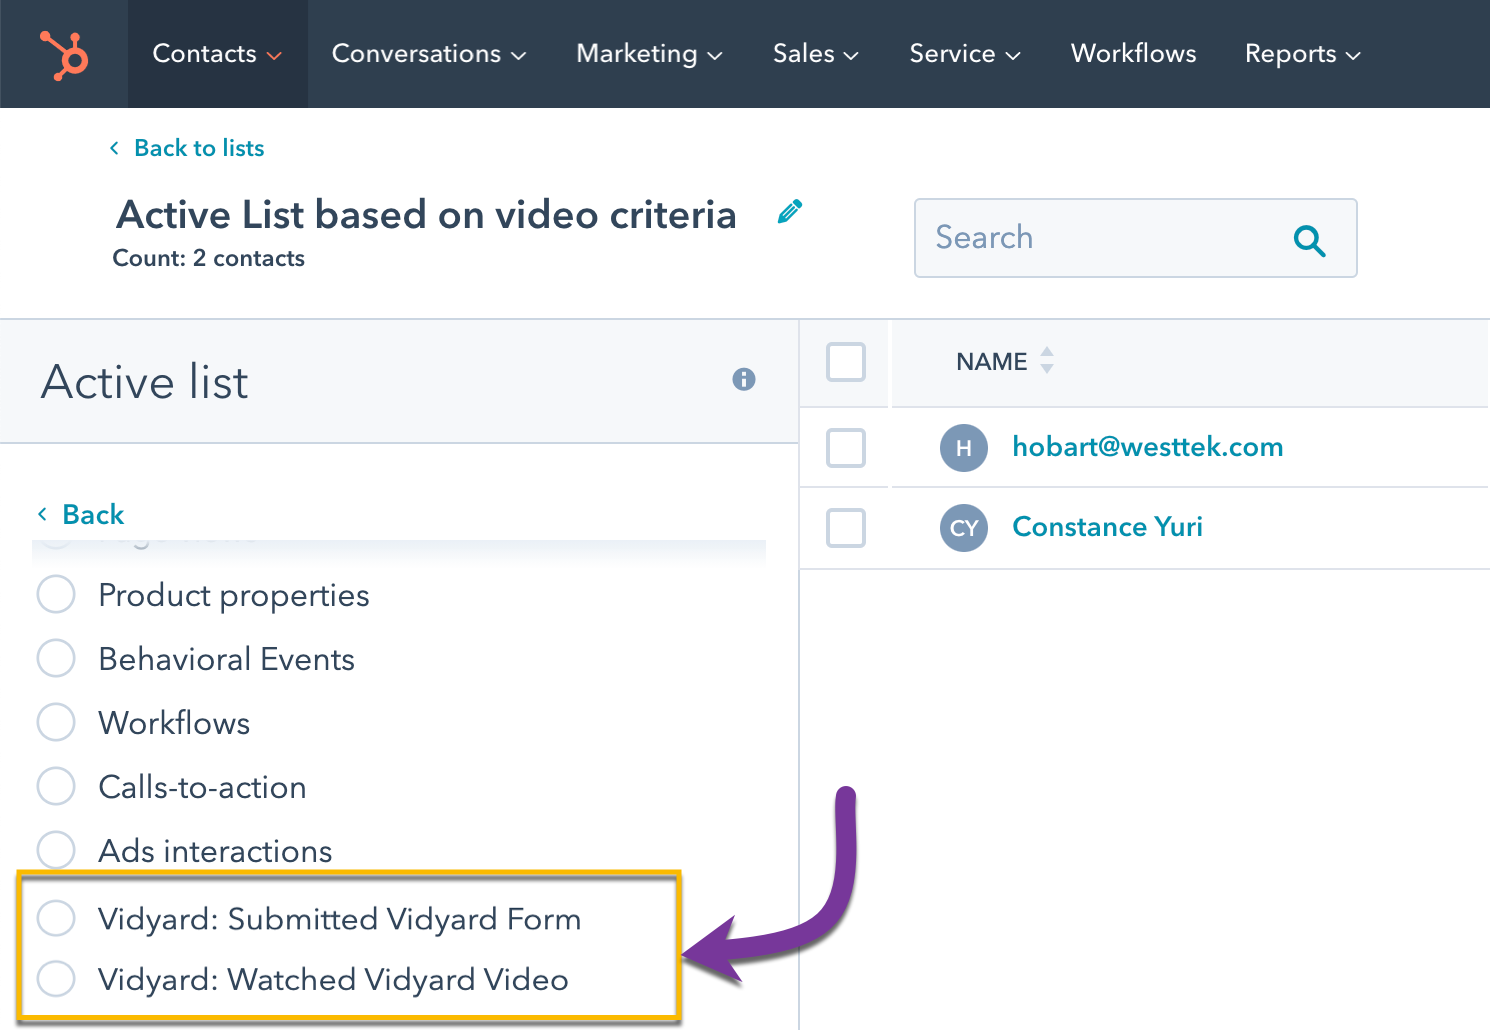 Selecting the Watched Vidyard Video or Submitted Vidyard Form filters to create a marketing list in HubSpot